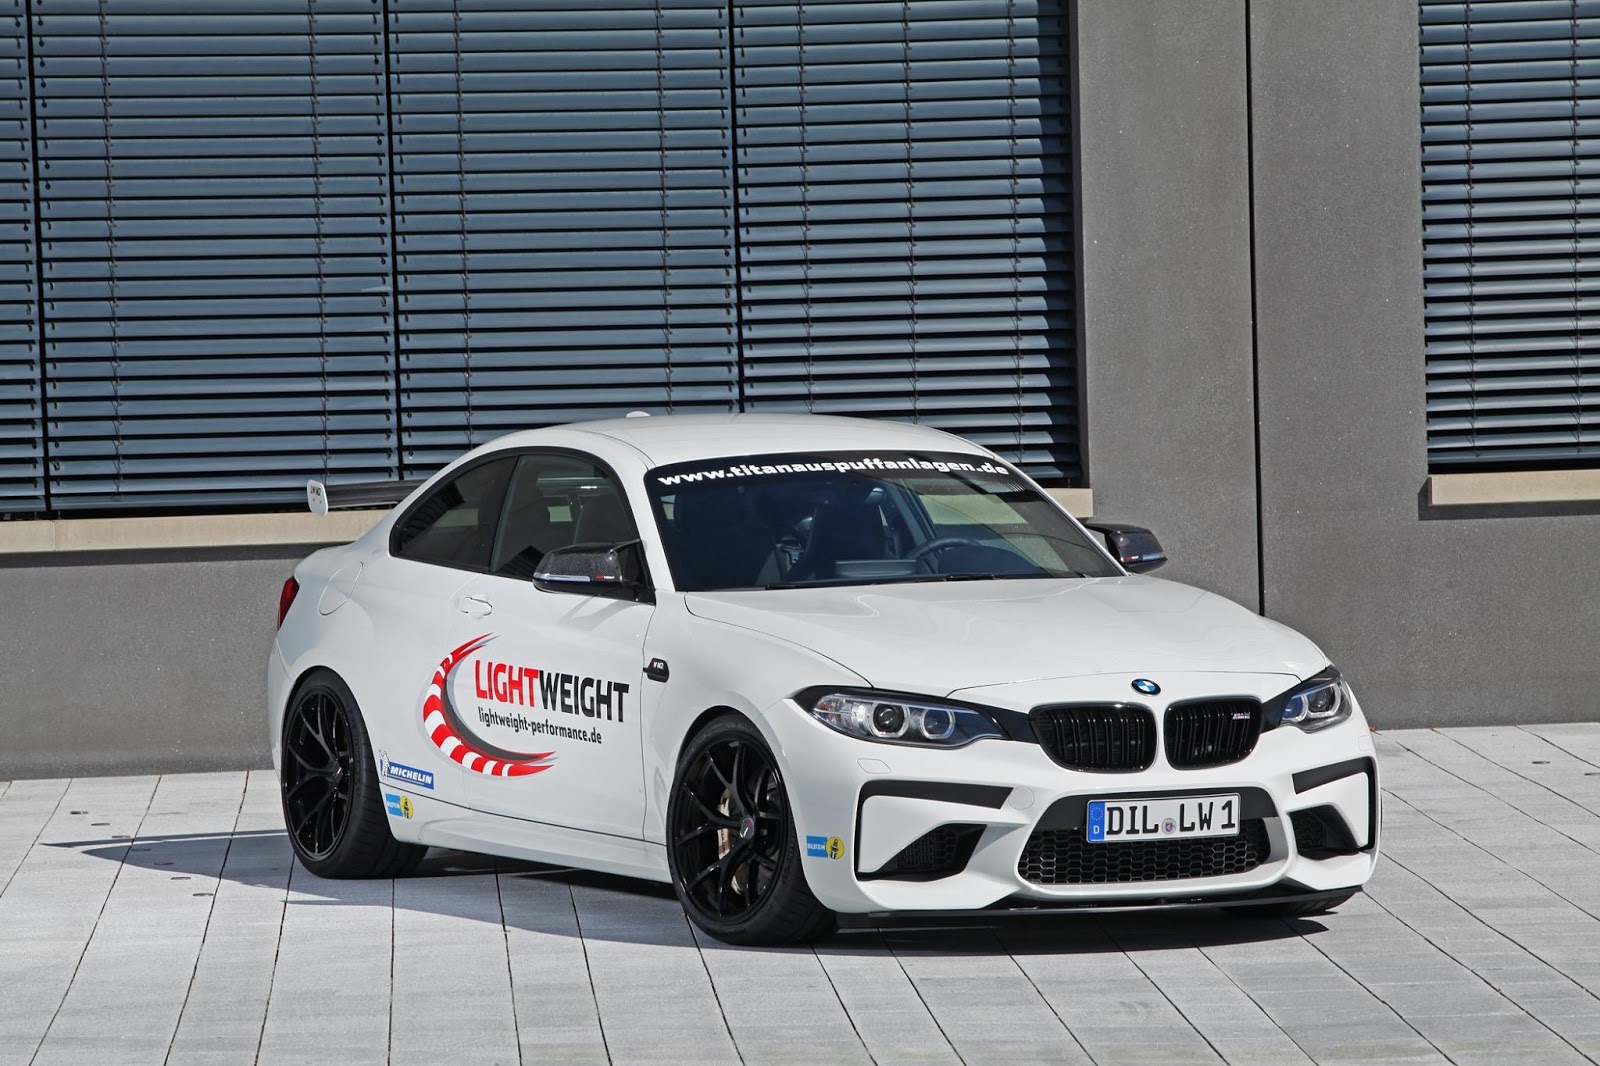 Lightweight Performance Add More Power to this Gorgeous BMW M2 Coupe